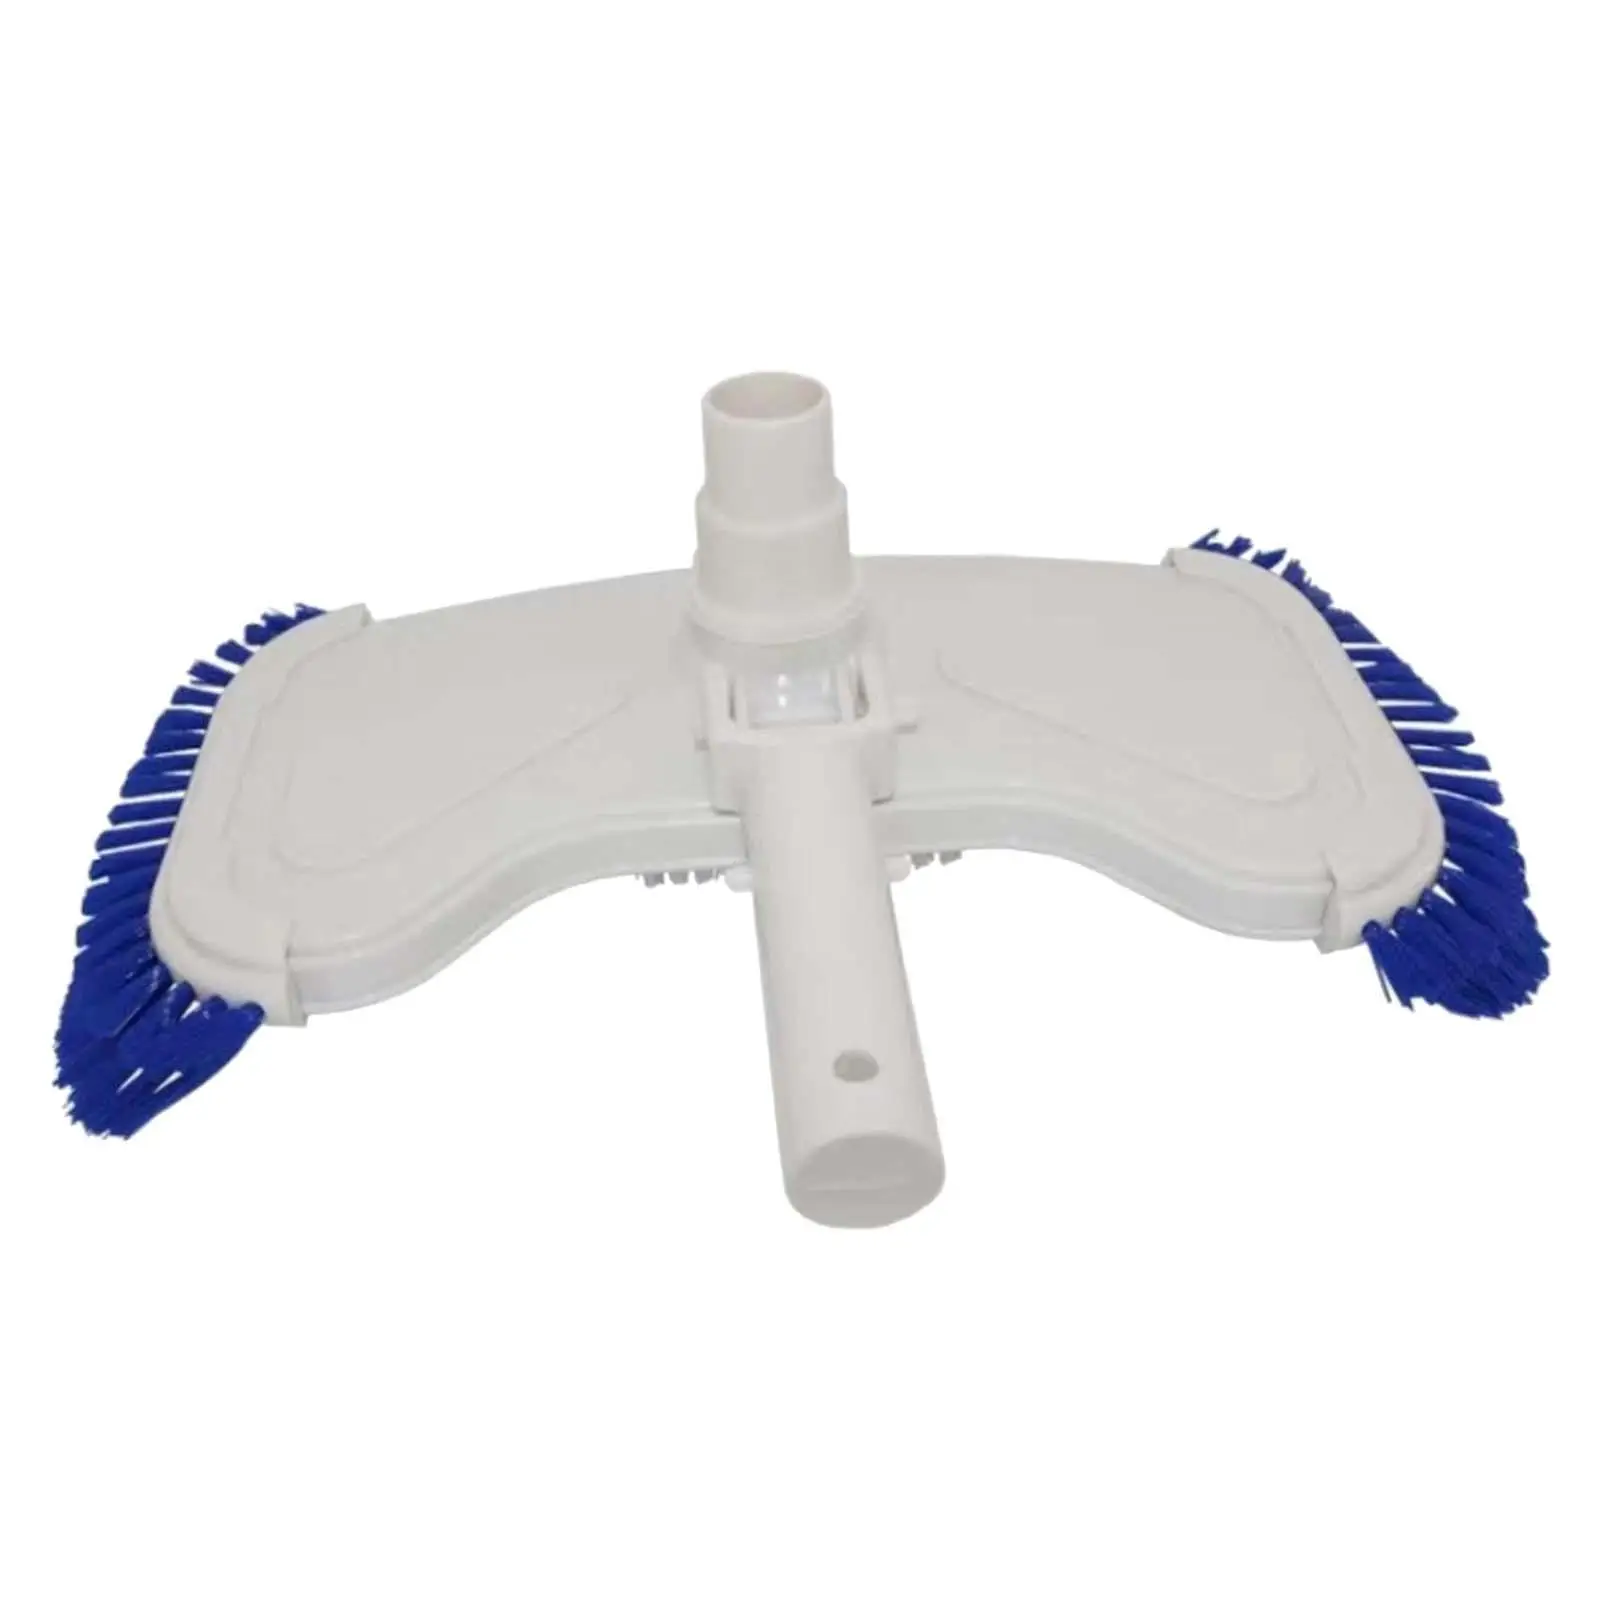 Swimming Pool Suction Head Pool Cleaning Suction Head Vacuum Pool Brush Head for Hot Tub Ground Pool Fountain